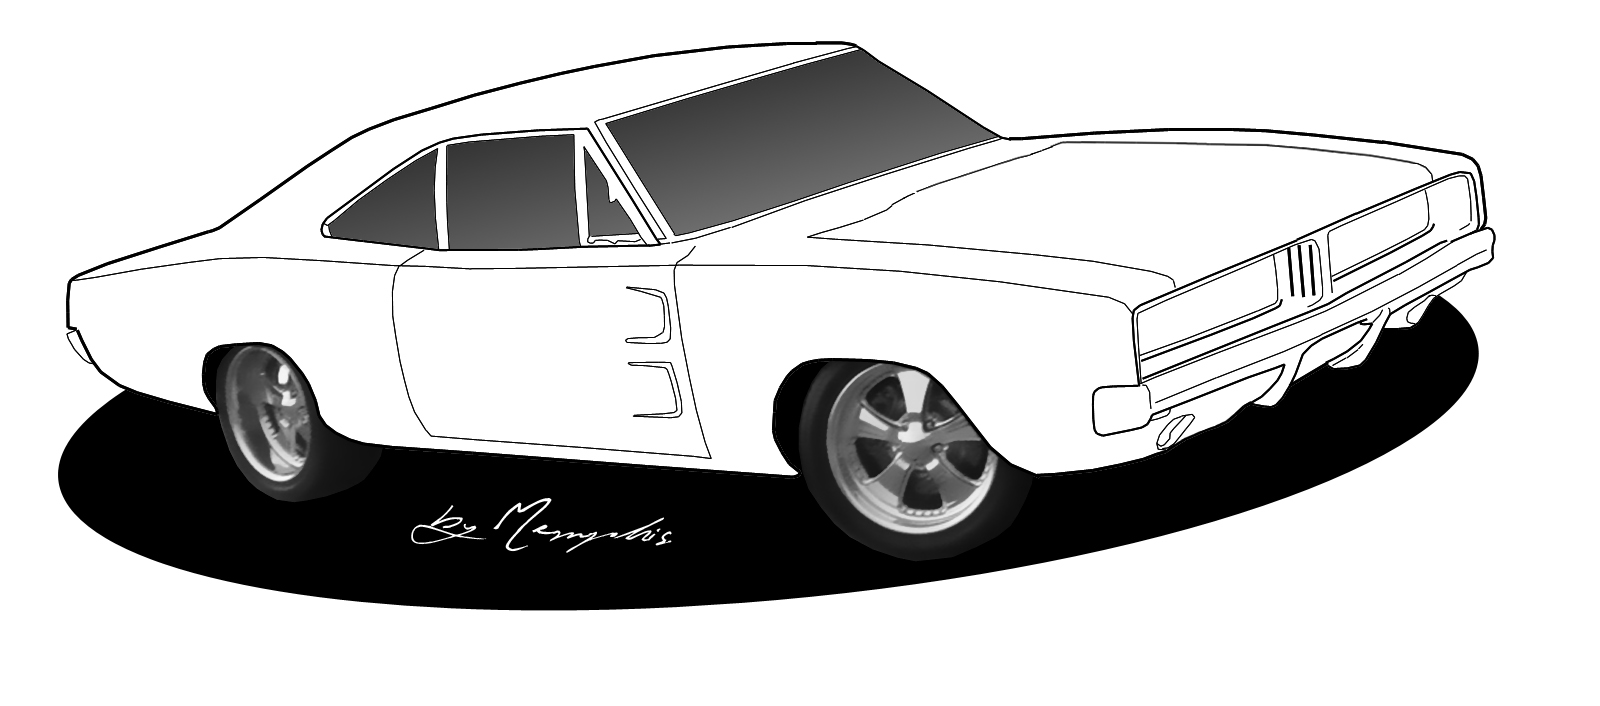 Black and white line drawings of muscle cars? - Page 2 - ClipArt ...